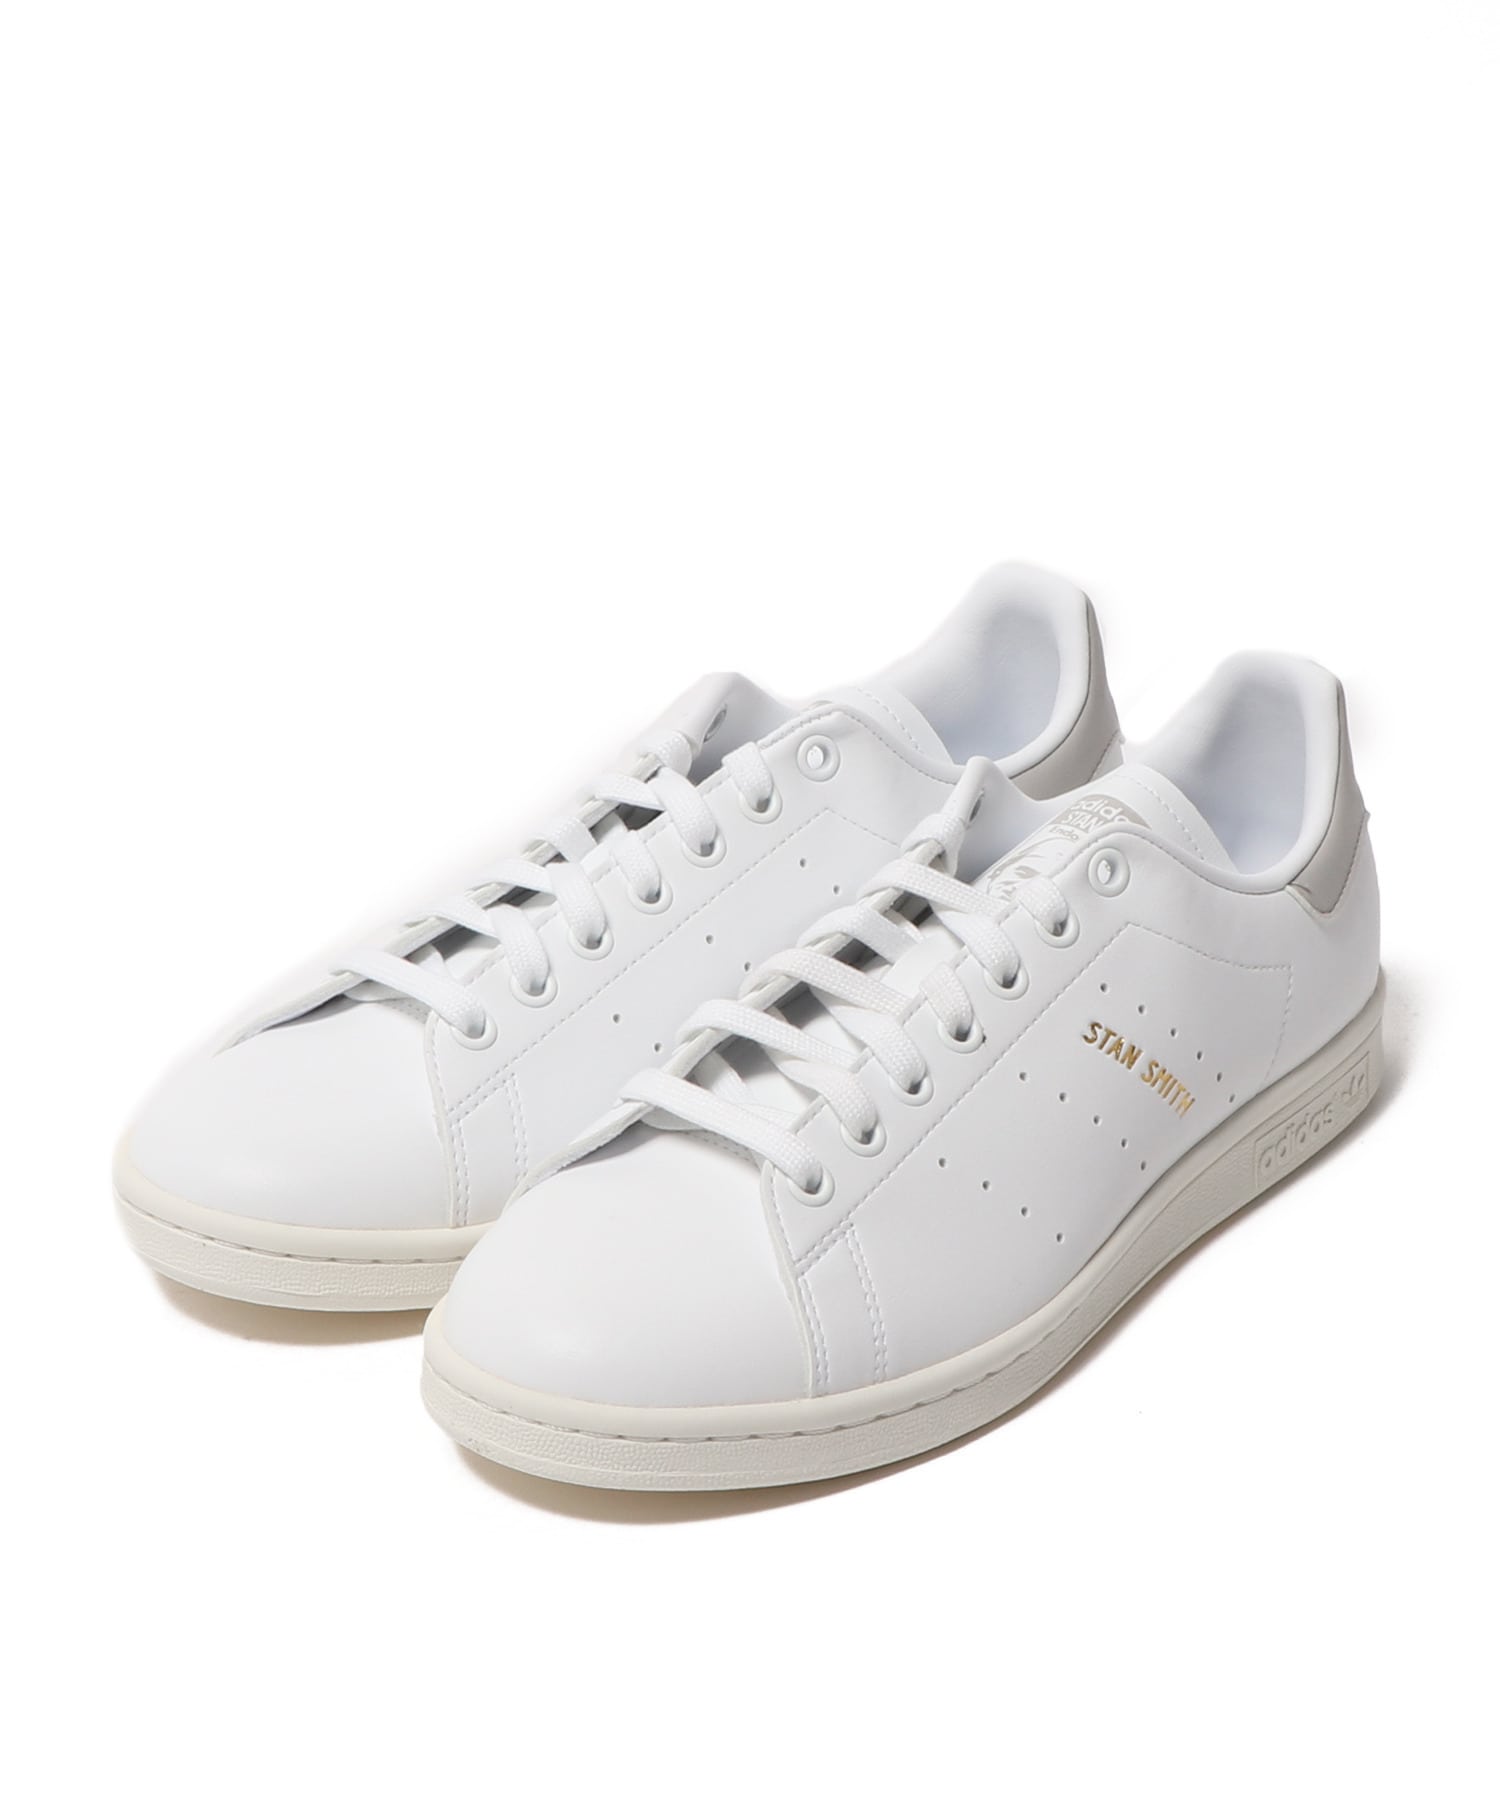 adidas / STAN SMITH｜ESTNATION ONLINE STORE｜エストネーション 公式通販